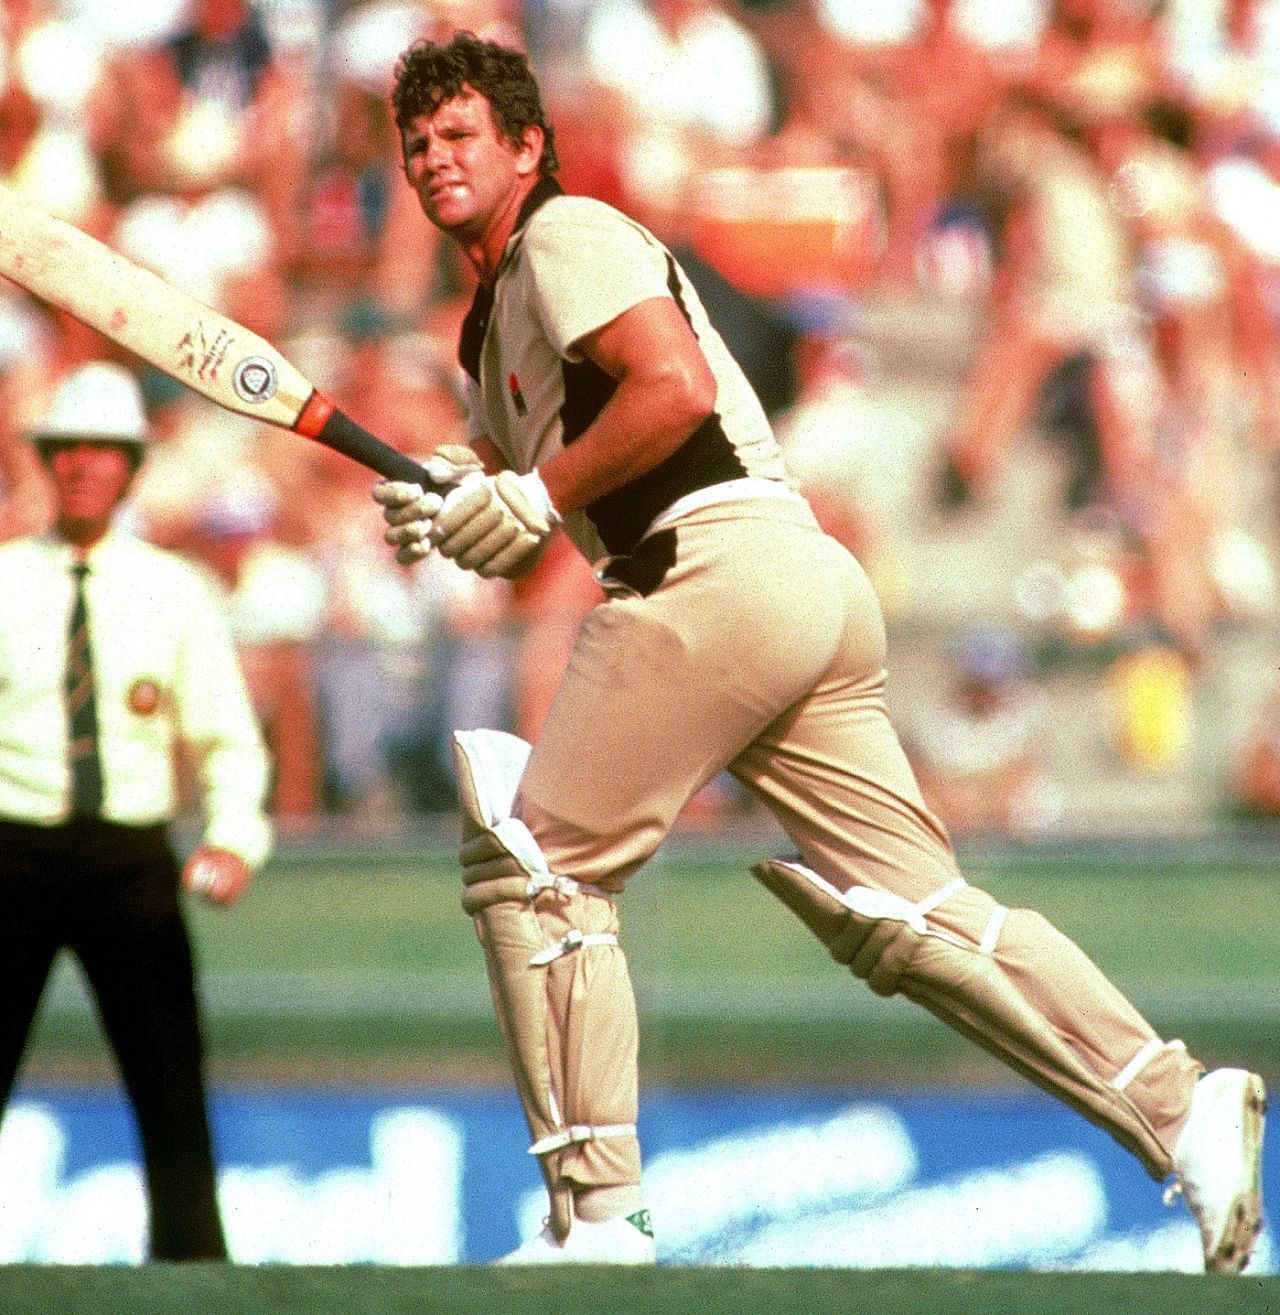 Lance Cairns uses the Excalibur bat during a one-day international, 1983